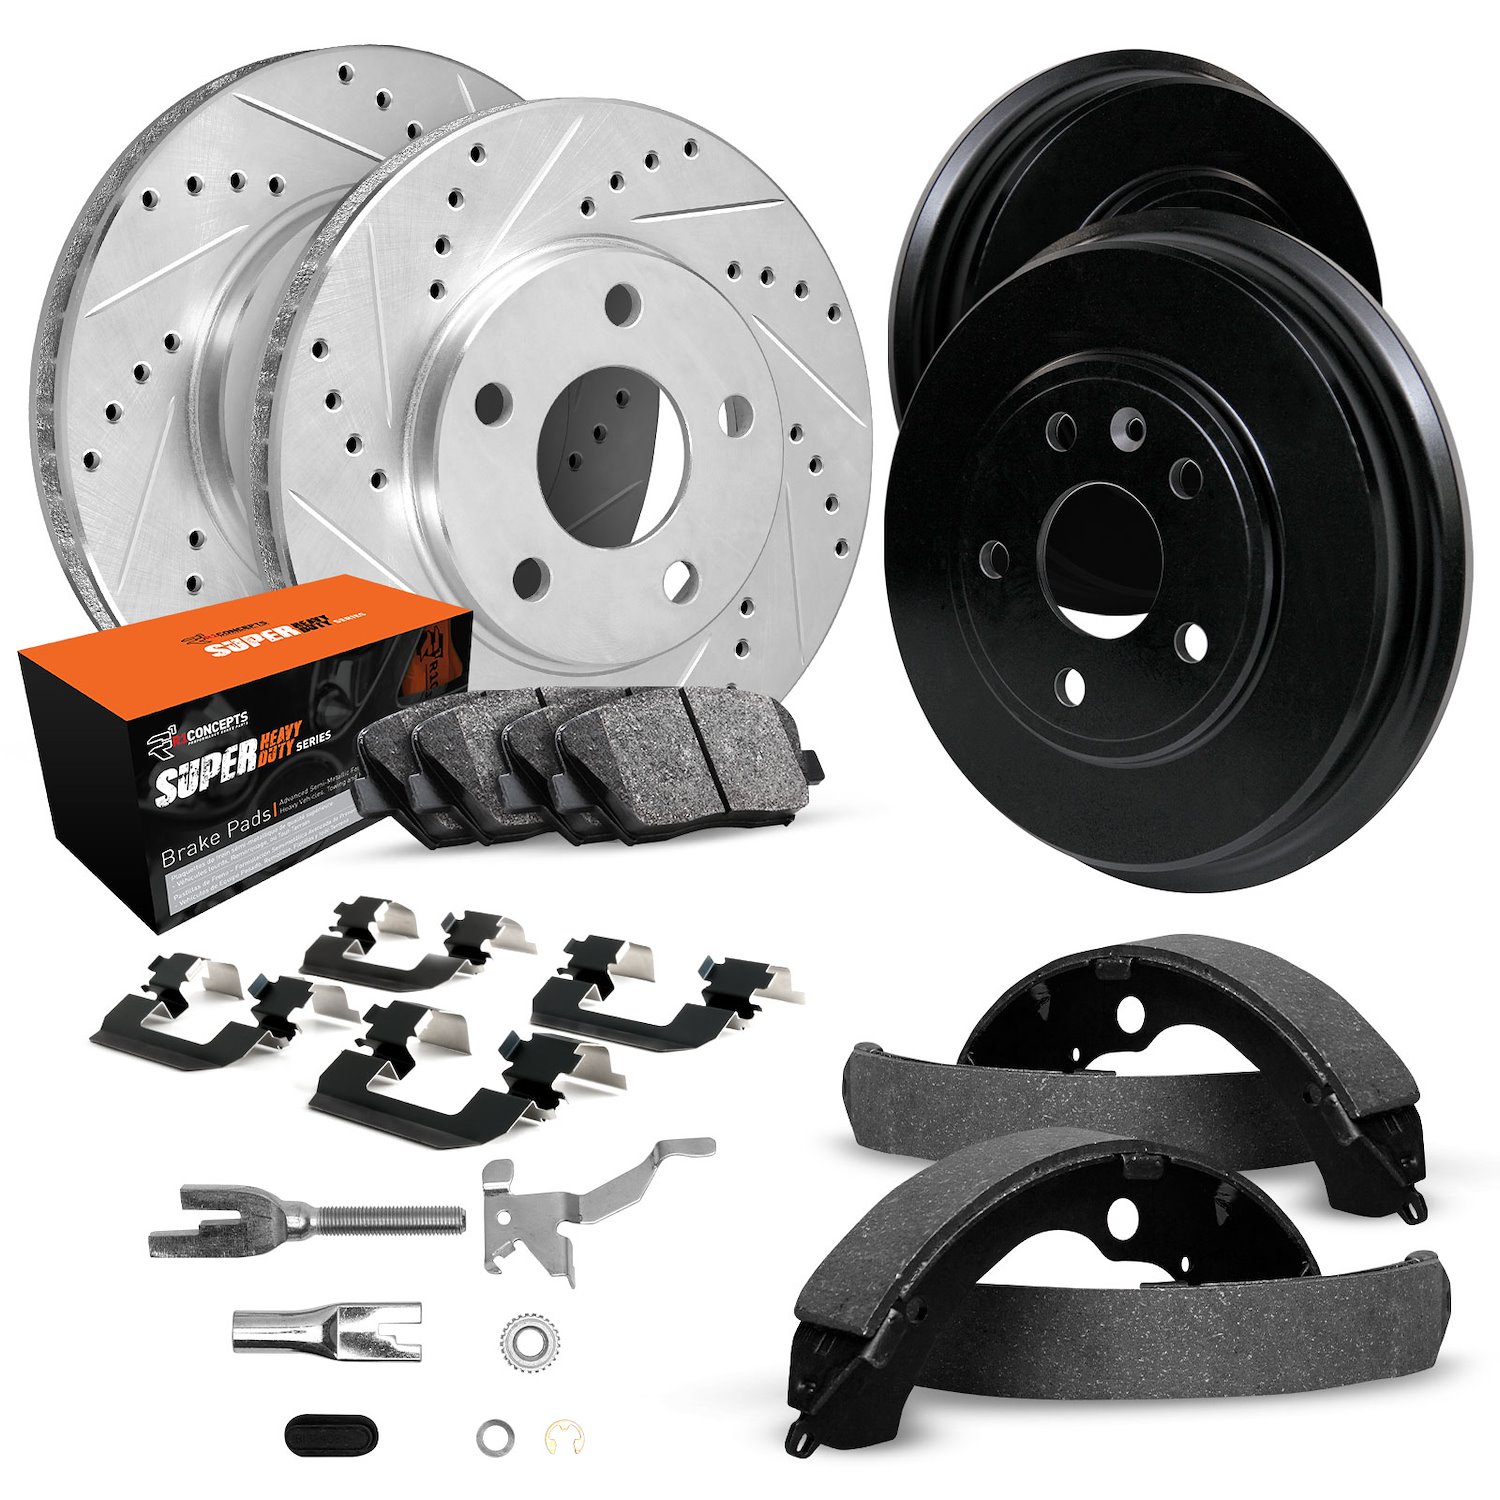 E-Line Drilled/Slotted Silver Rotor & Drum Set w/Super-Duty Pads, Shoes/Hardware/Adjusters, 1975-1985 Mopar